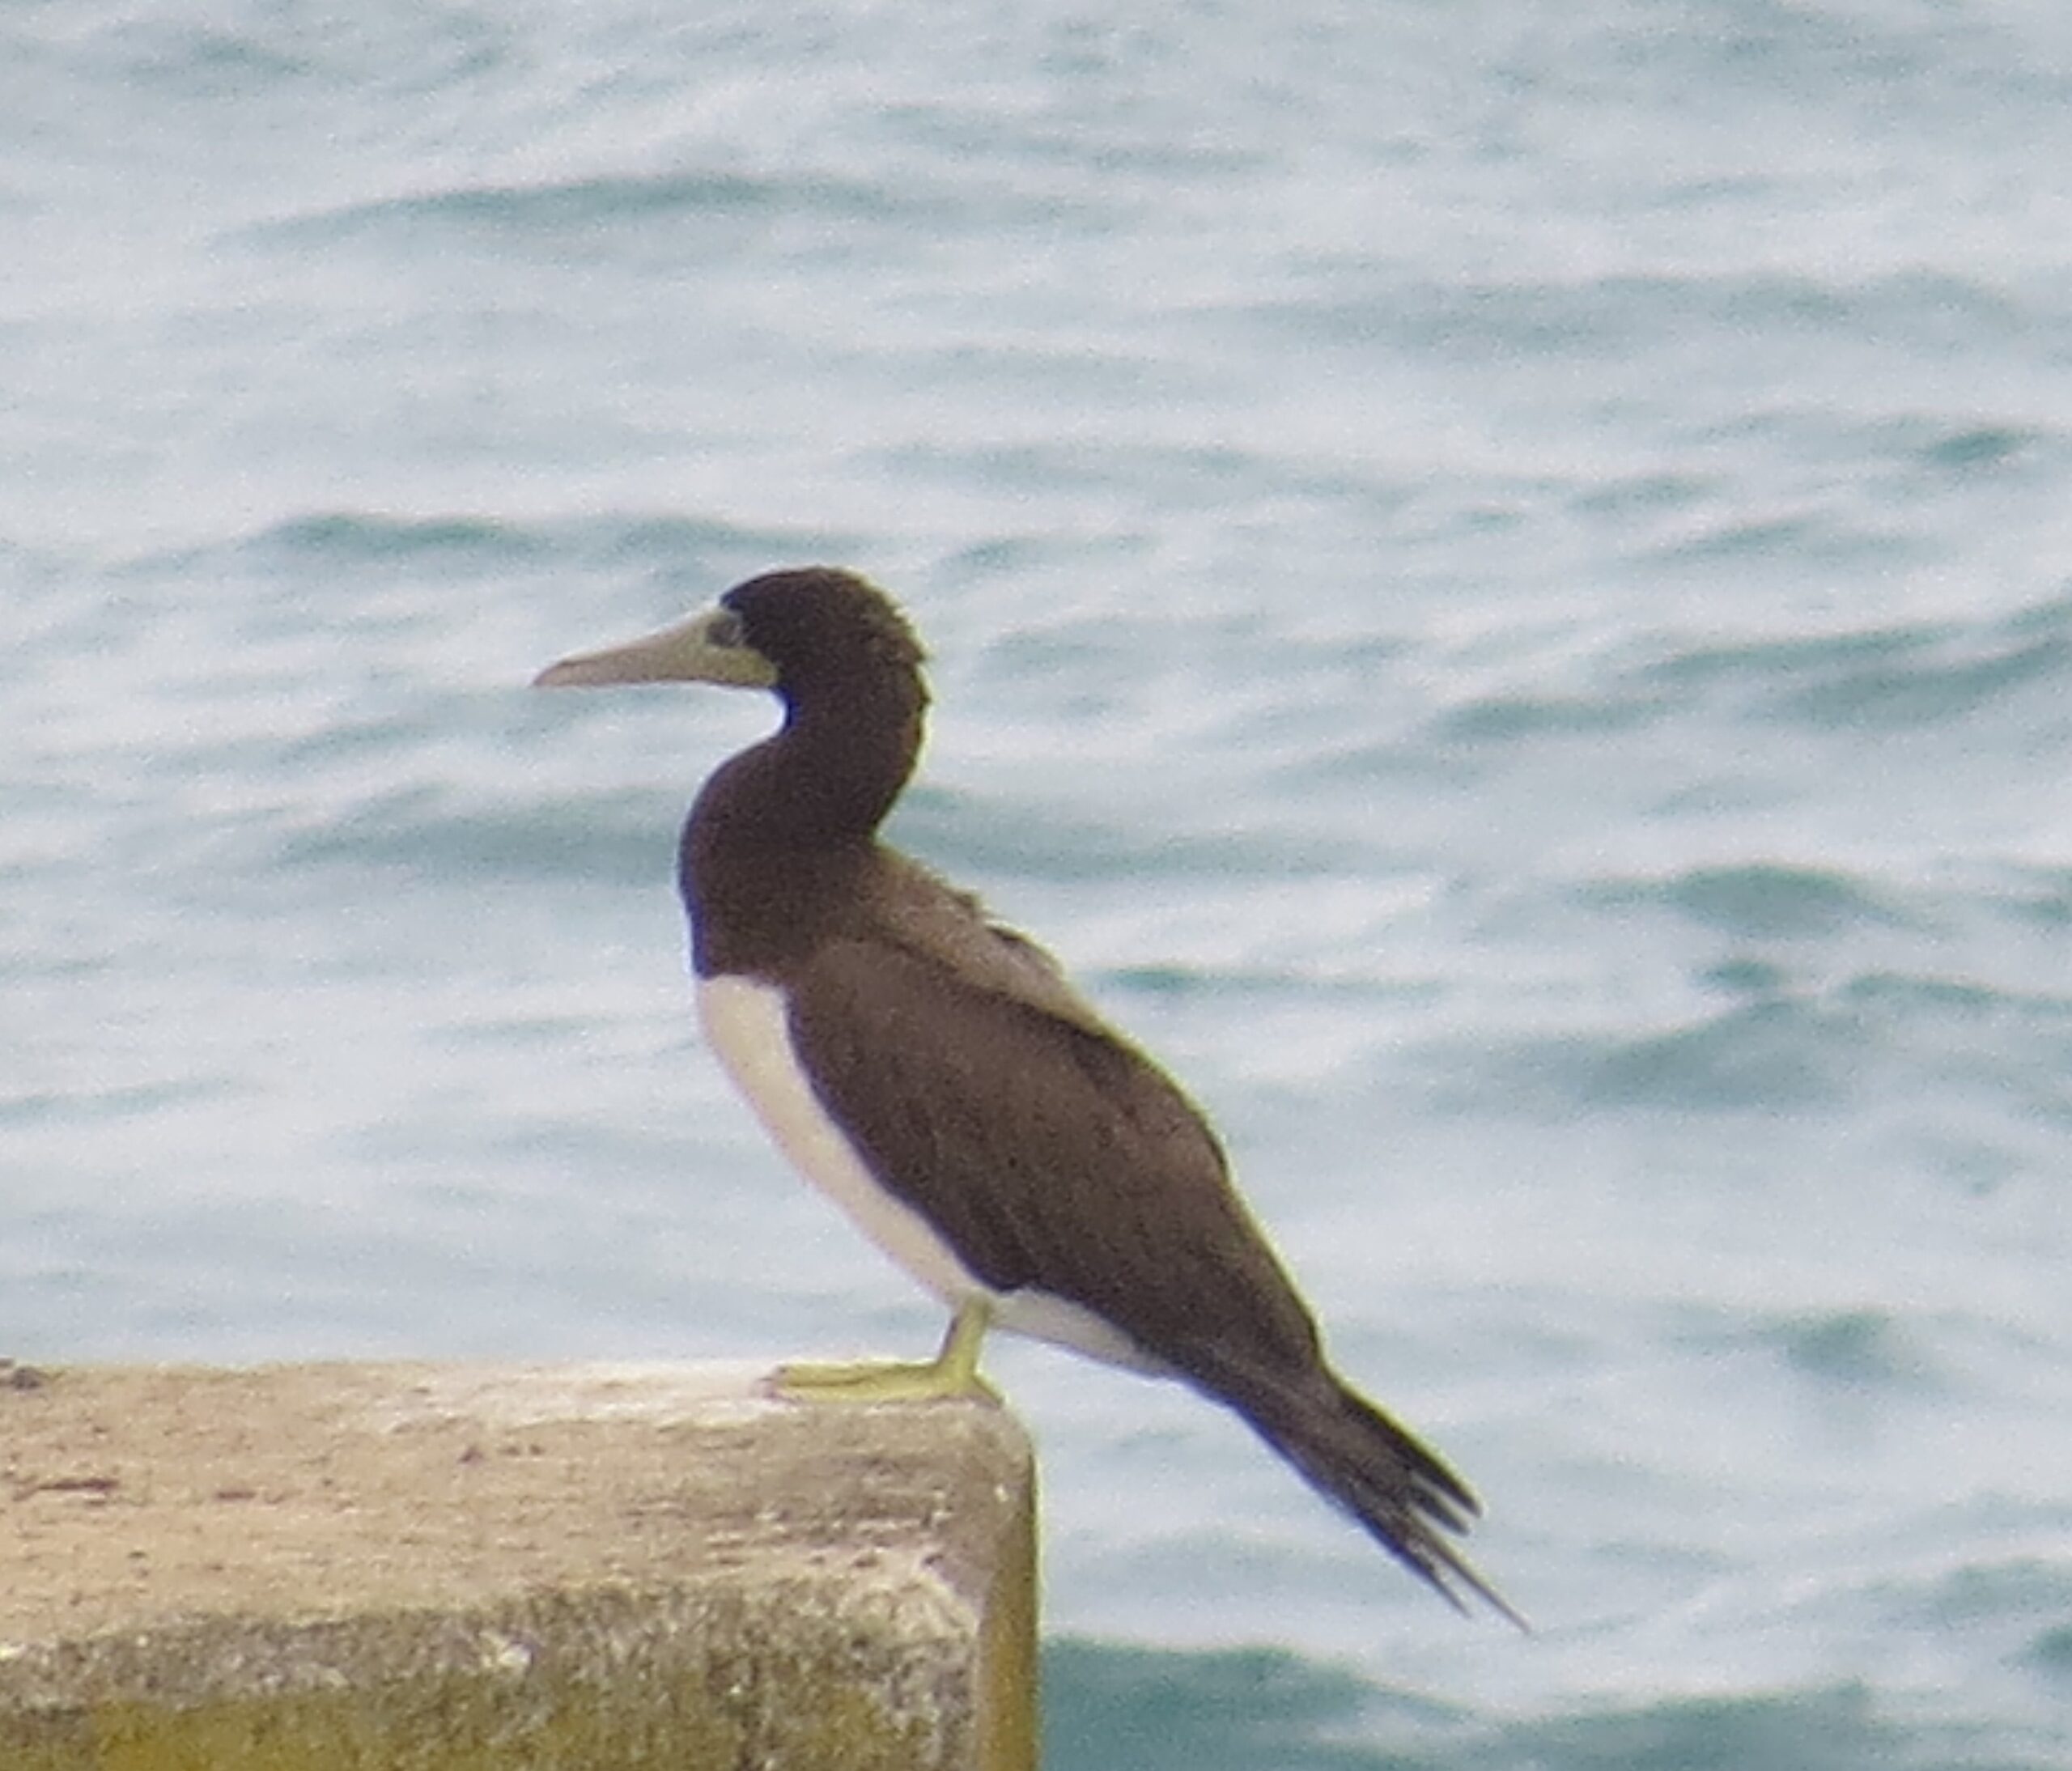 Brown Booby, 6/3/2020